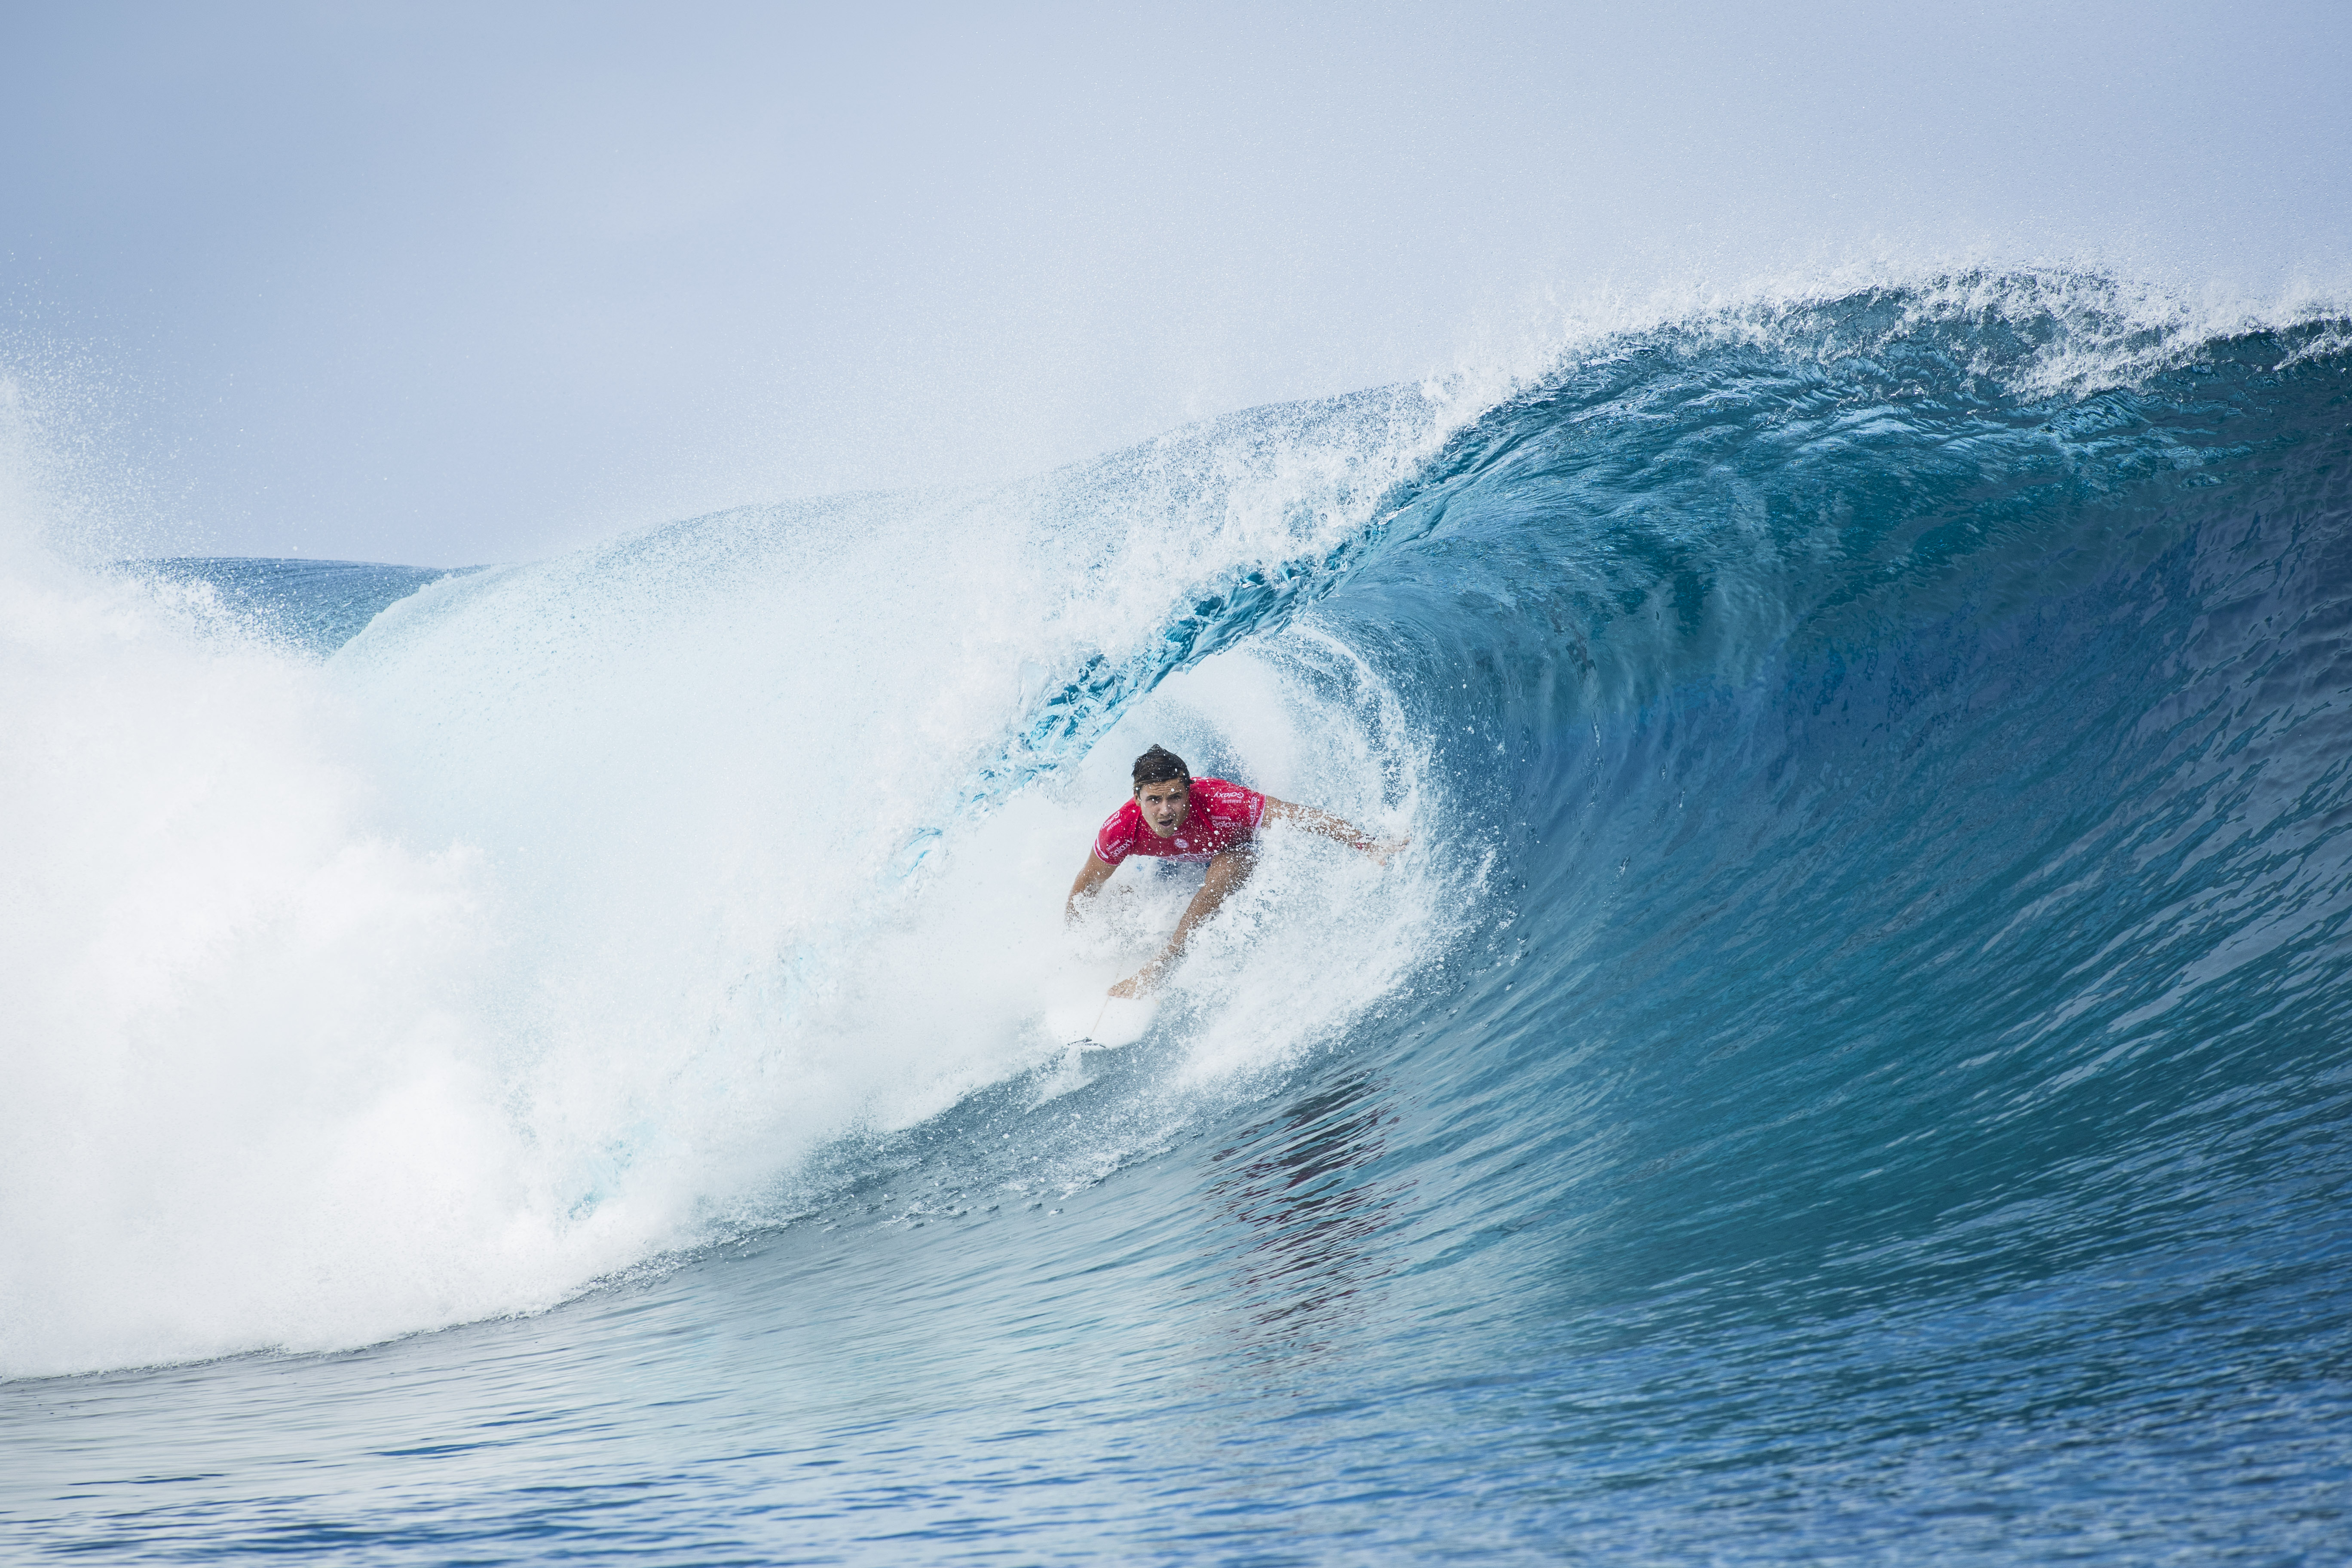 Julian Wilson (AUS) eliminated 2016 WSL Rookie Ryan Callinan (AUS) today in Round 2 Heat 4 of the Billabong Pro Tahiti. Wilson will advance to Round 3 where he will face defending event winner, Jeremy Flores (FRA), in Heat 10.  Image: © WSL / Poullenot